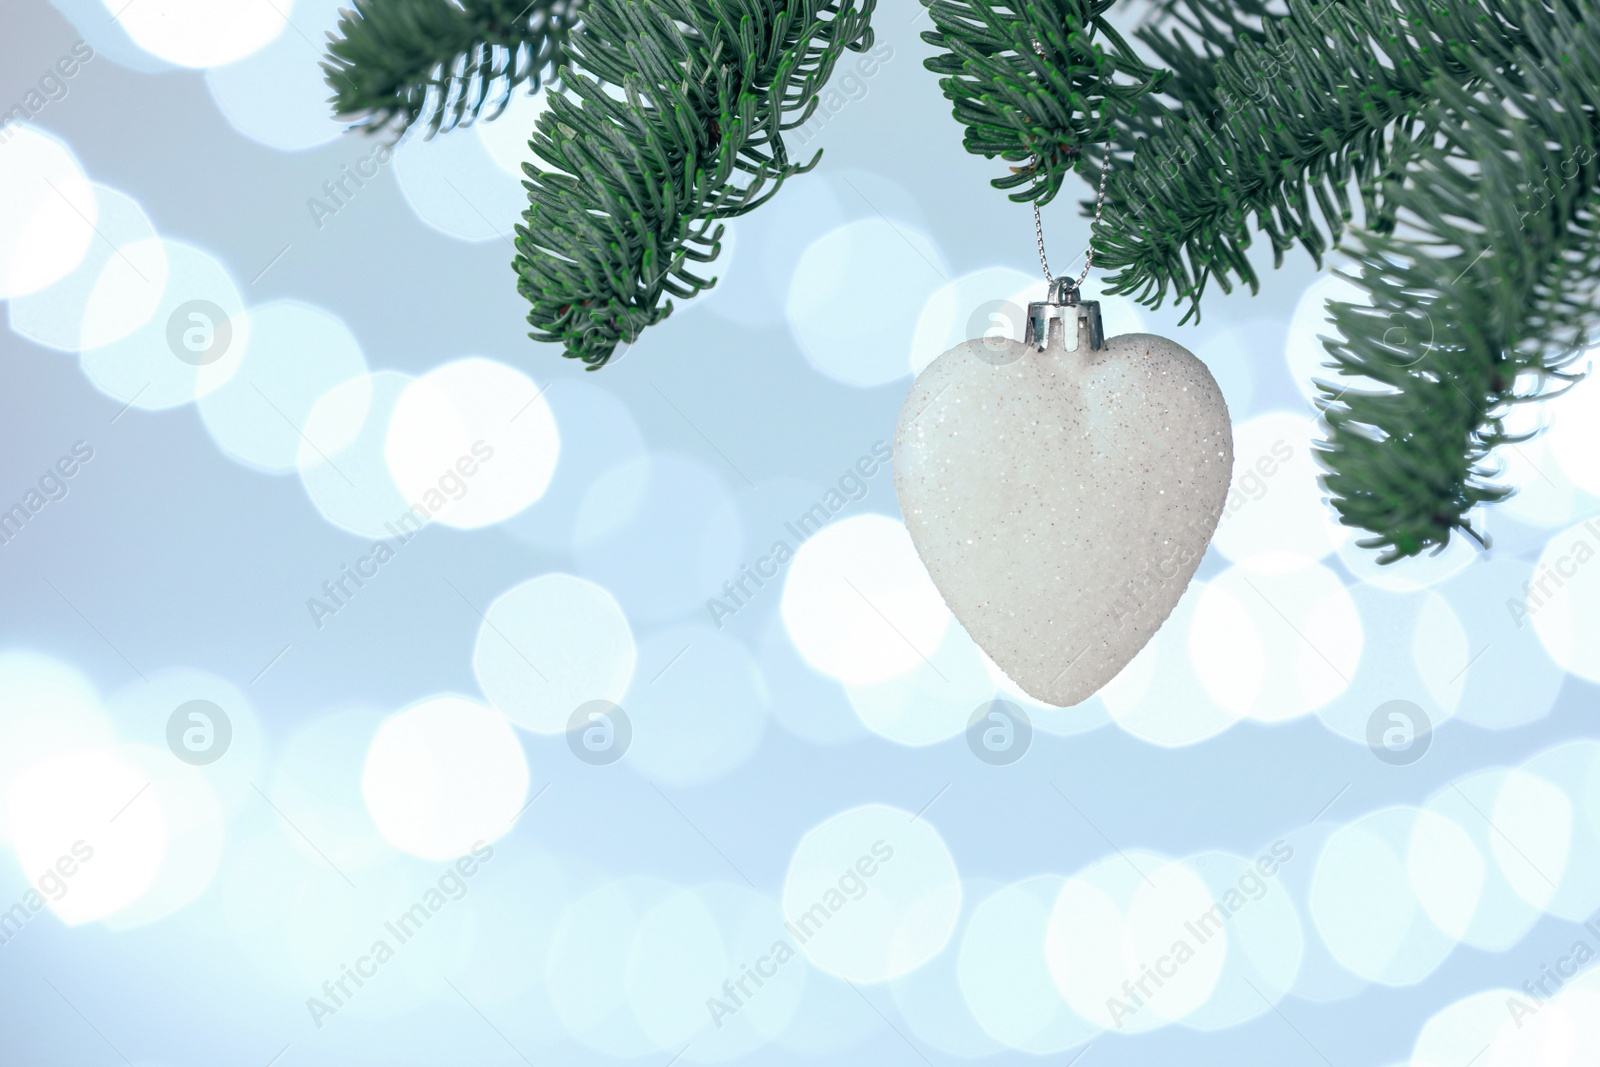 Photo of Beautiful holiday bauble hanging on Christmas tree against blurred lights, closeup. Space for text